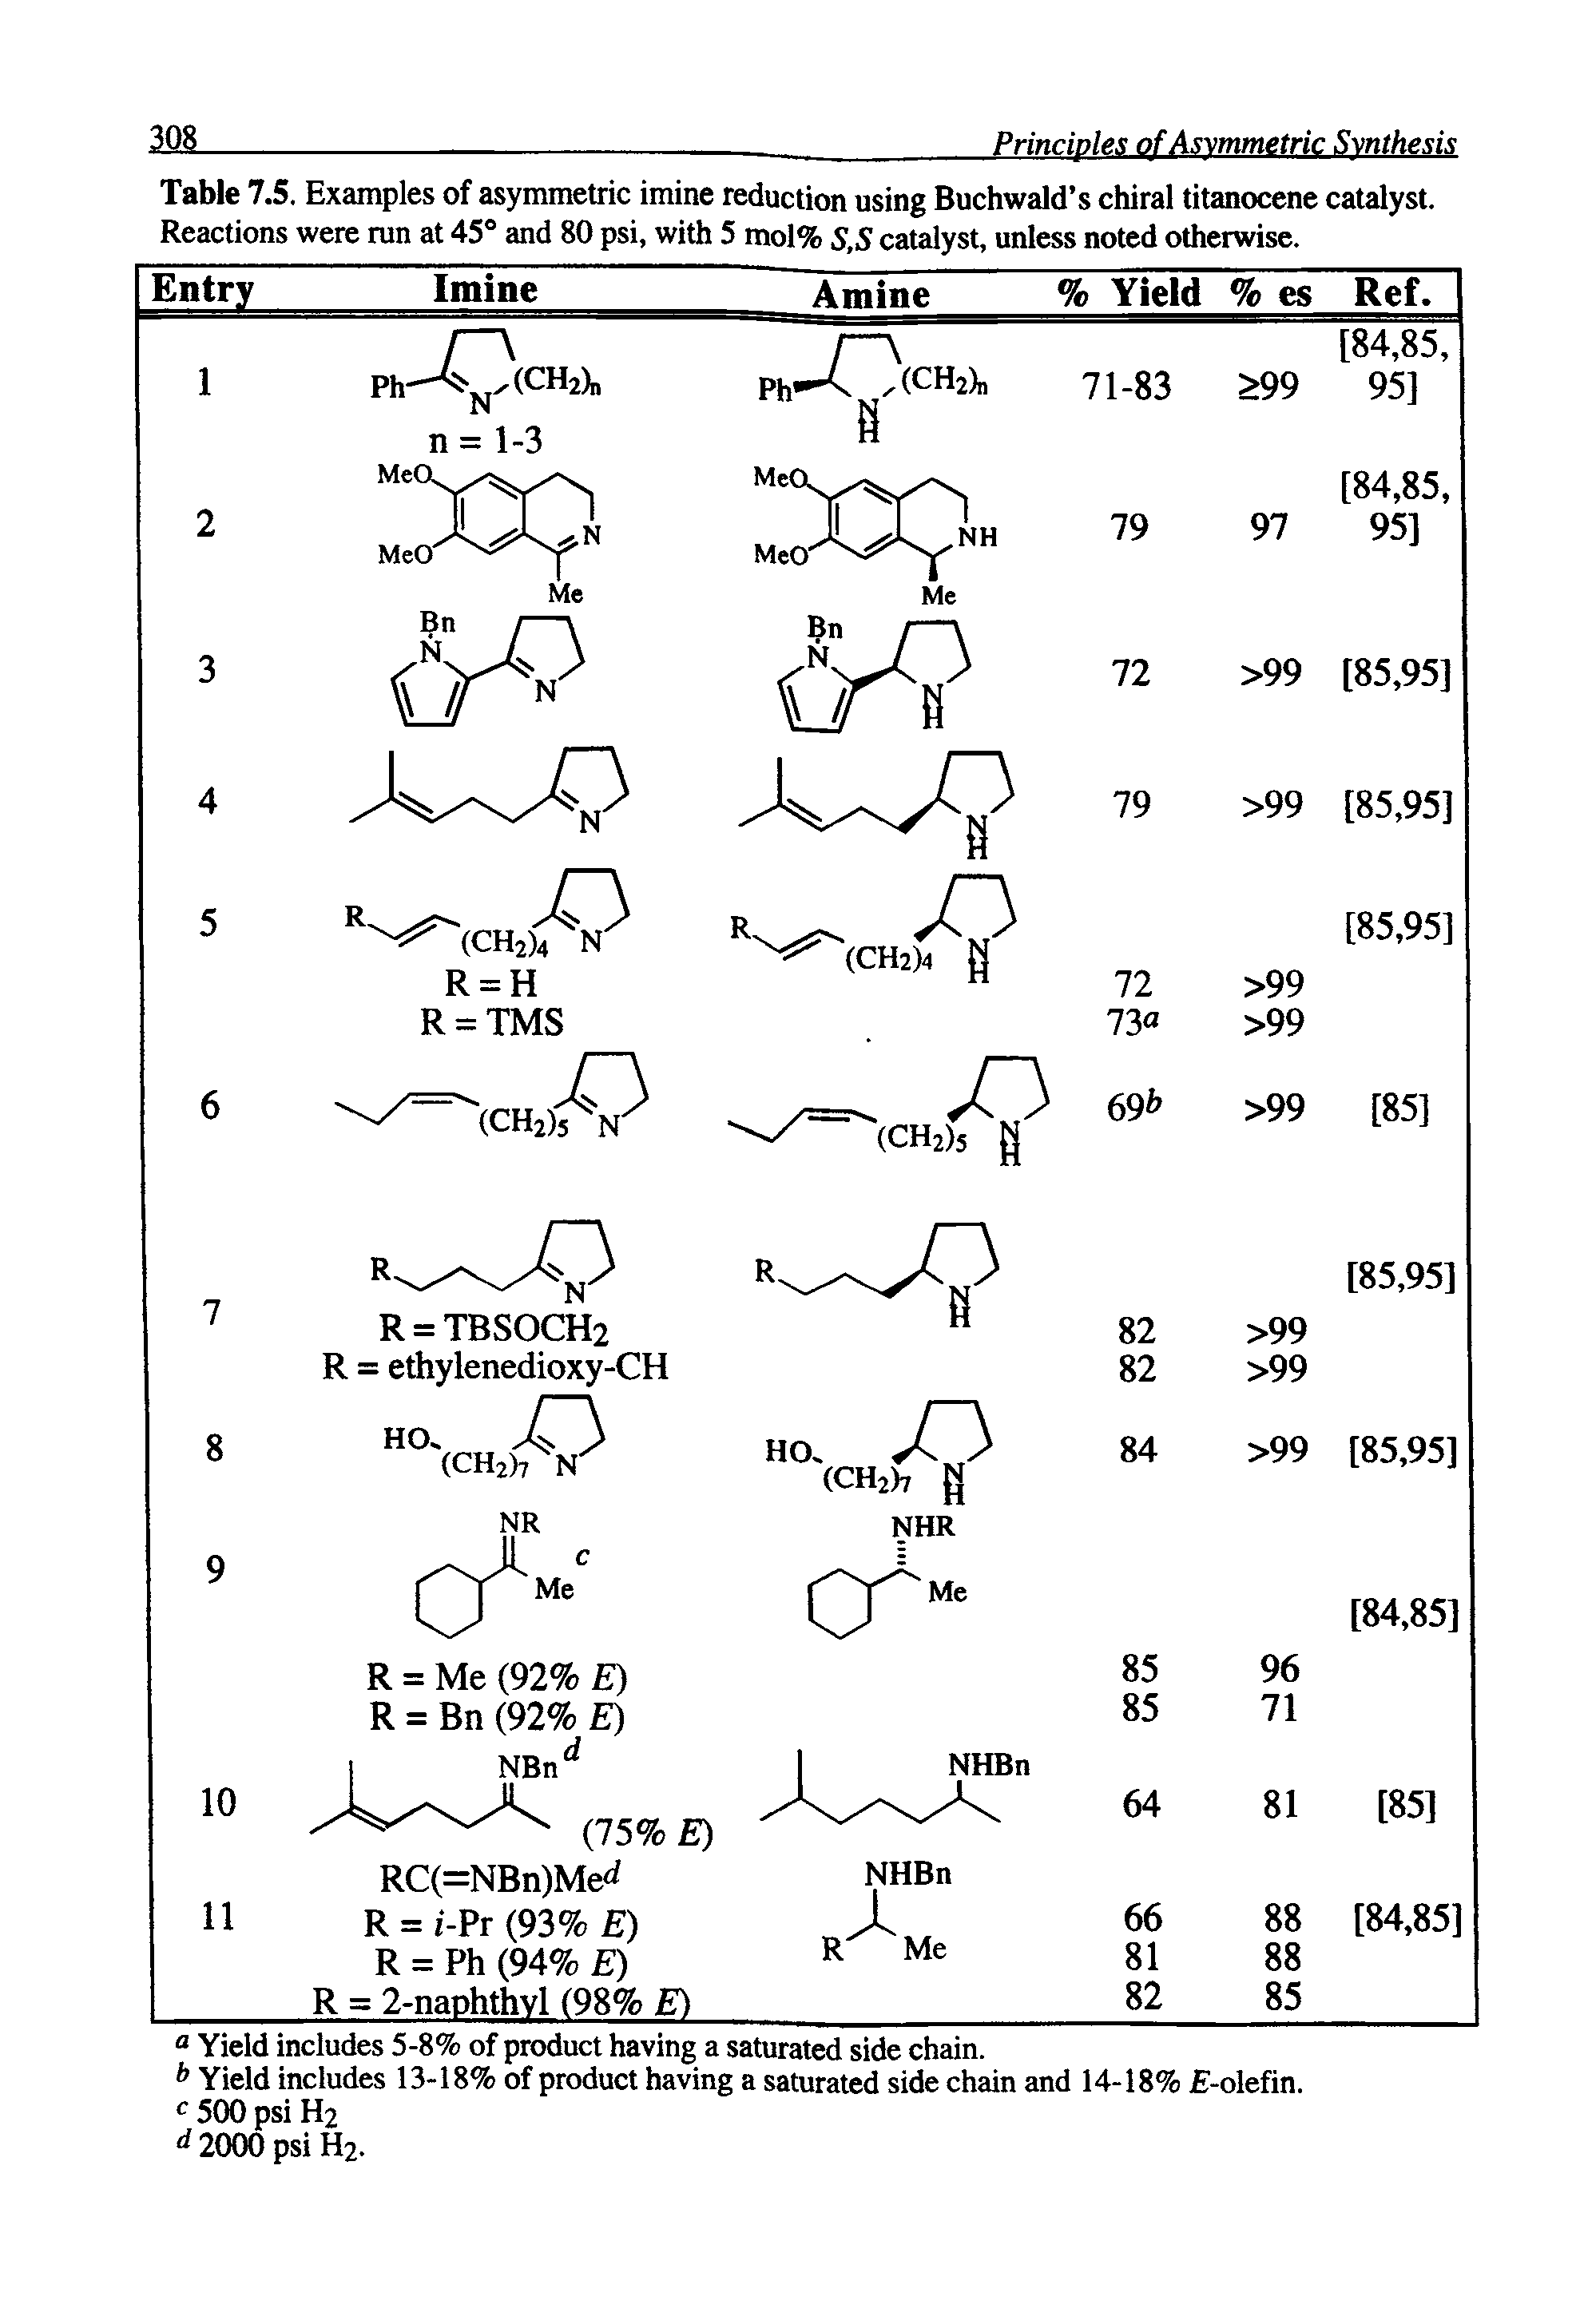 Table 7.5. Examples of asymmetric imine reduction using Buchwald s chiral titanocene catalyst. Reactions were run at 45° and 80 psi, with 5 mol% s,S catalyst, unless noted otherwise.